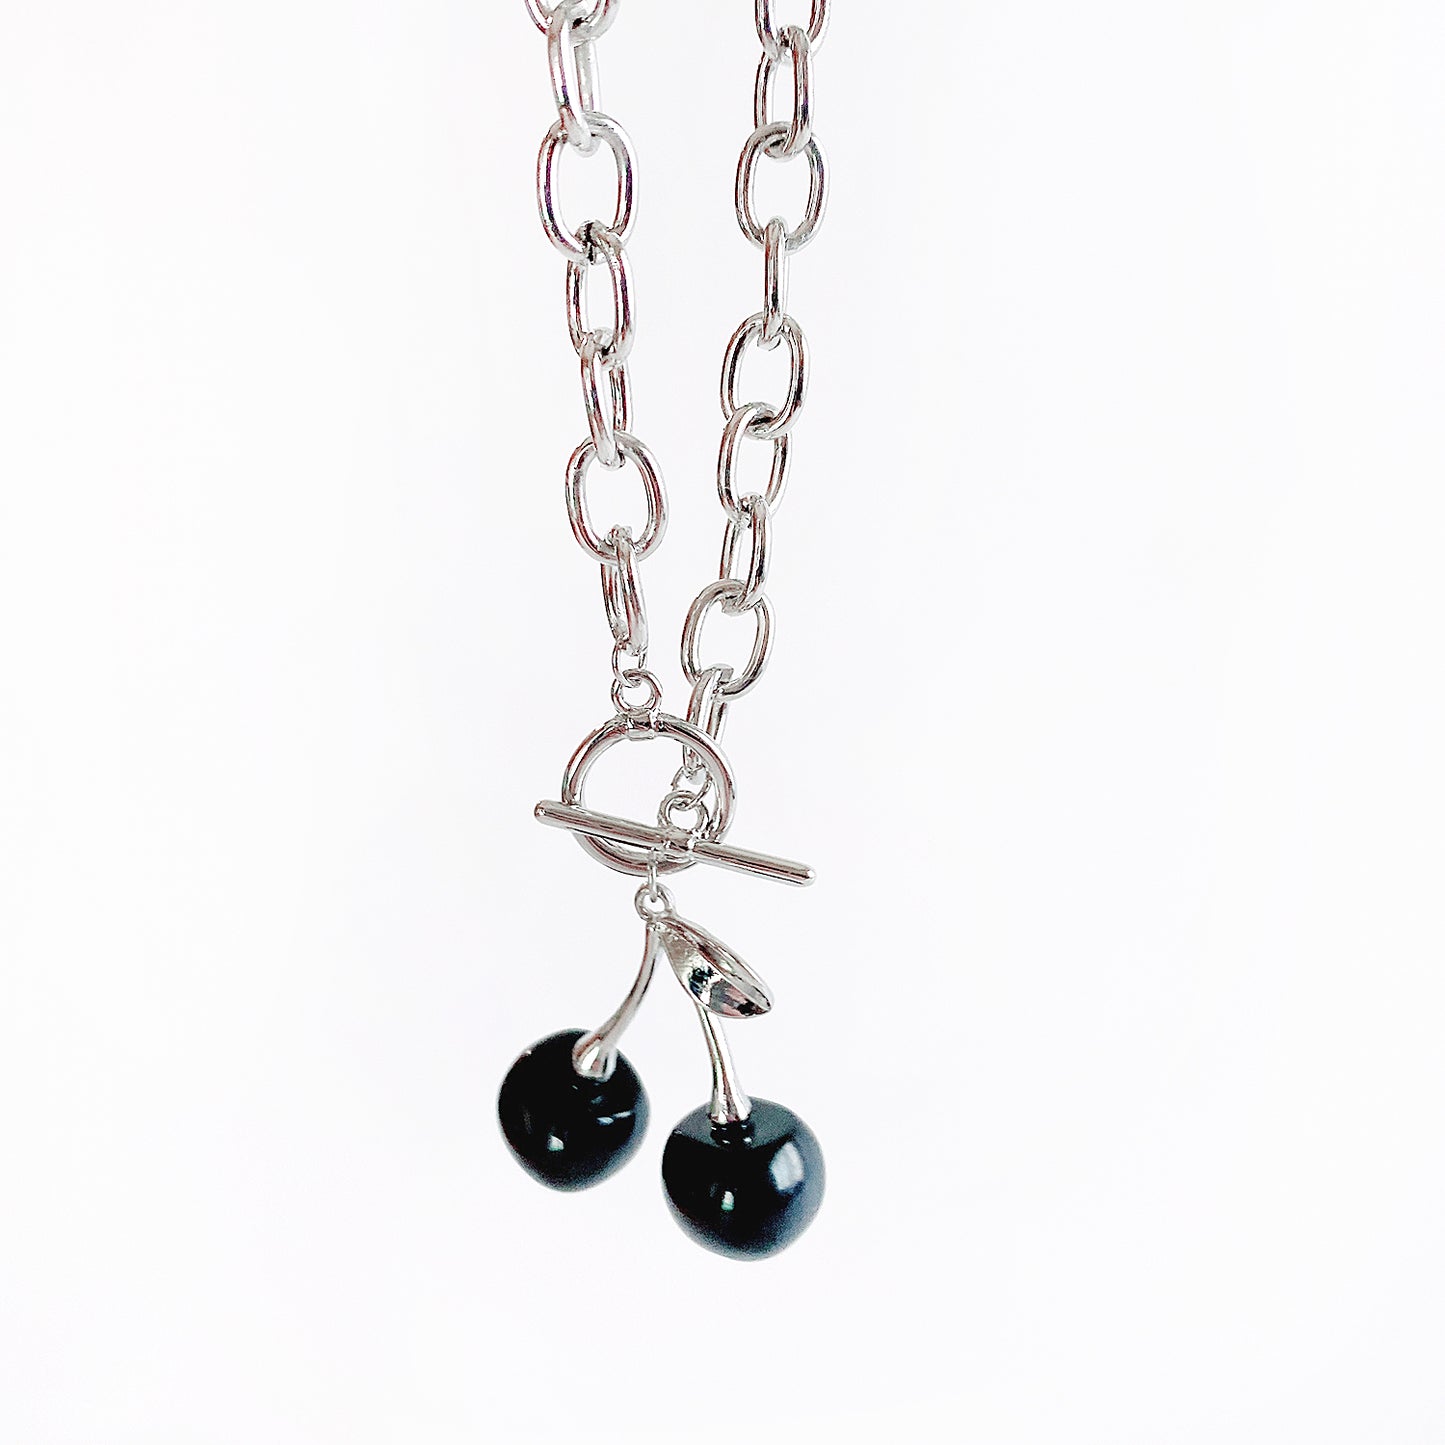 Black Cherry Chain Necklace - YOUAREMYPOISON